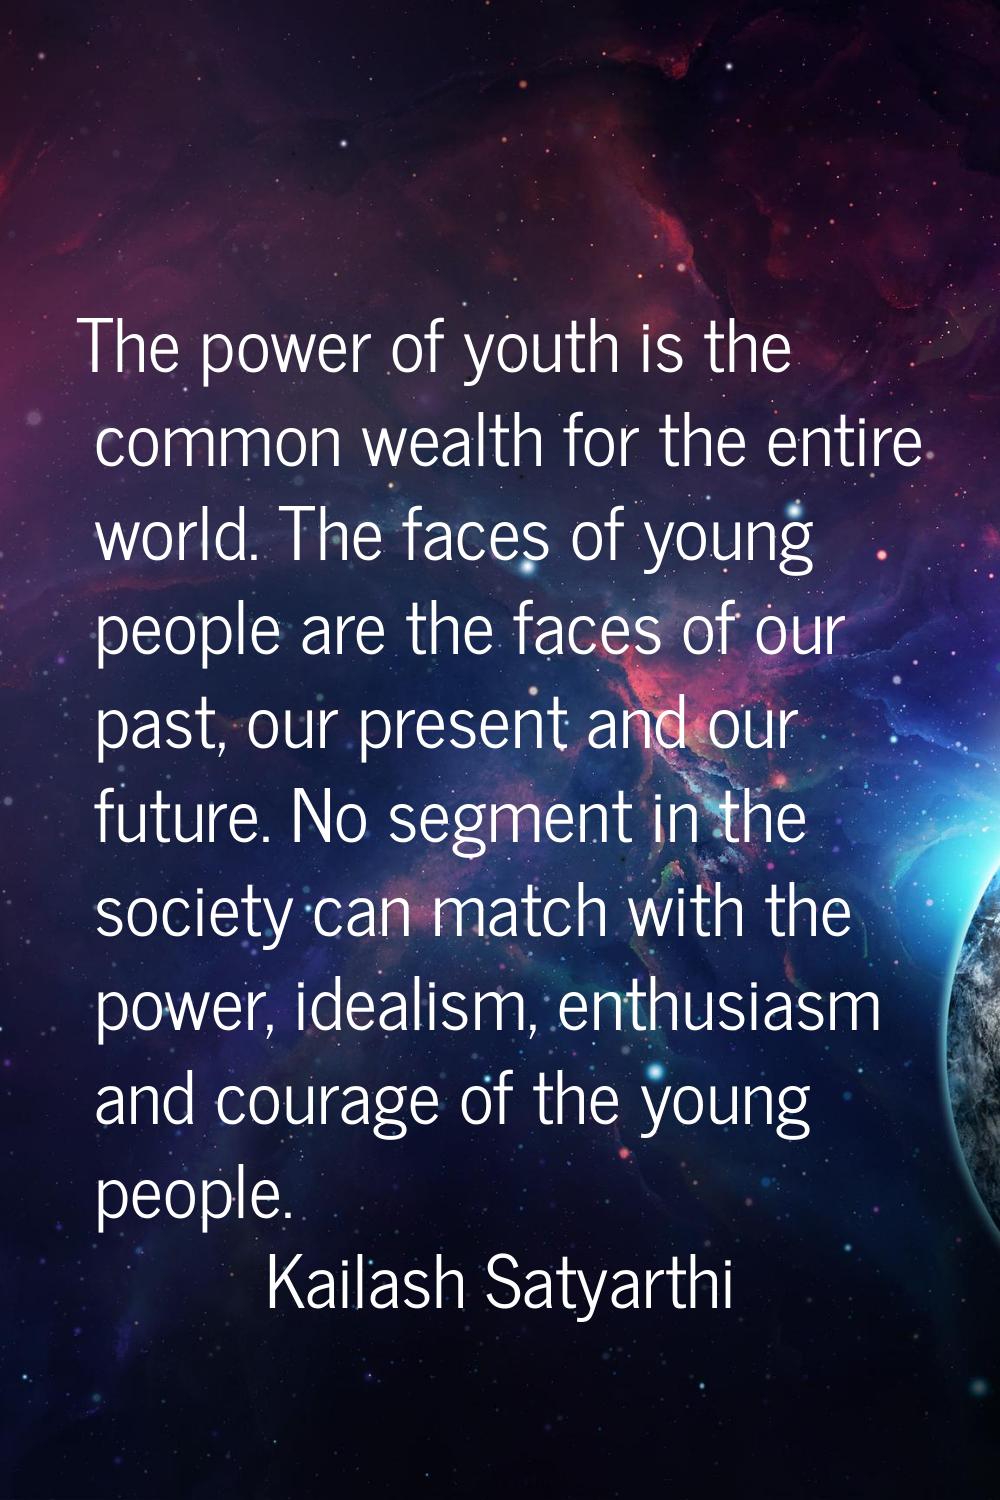 The power of youth is the common wealth for the entire world. The faces of young people are the fac